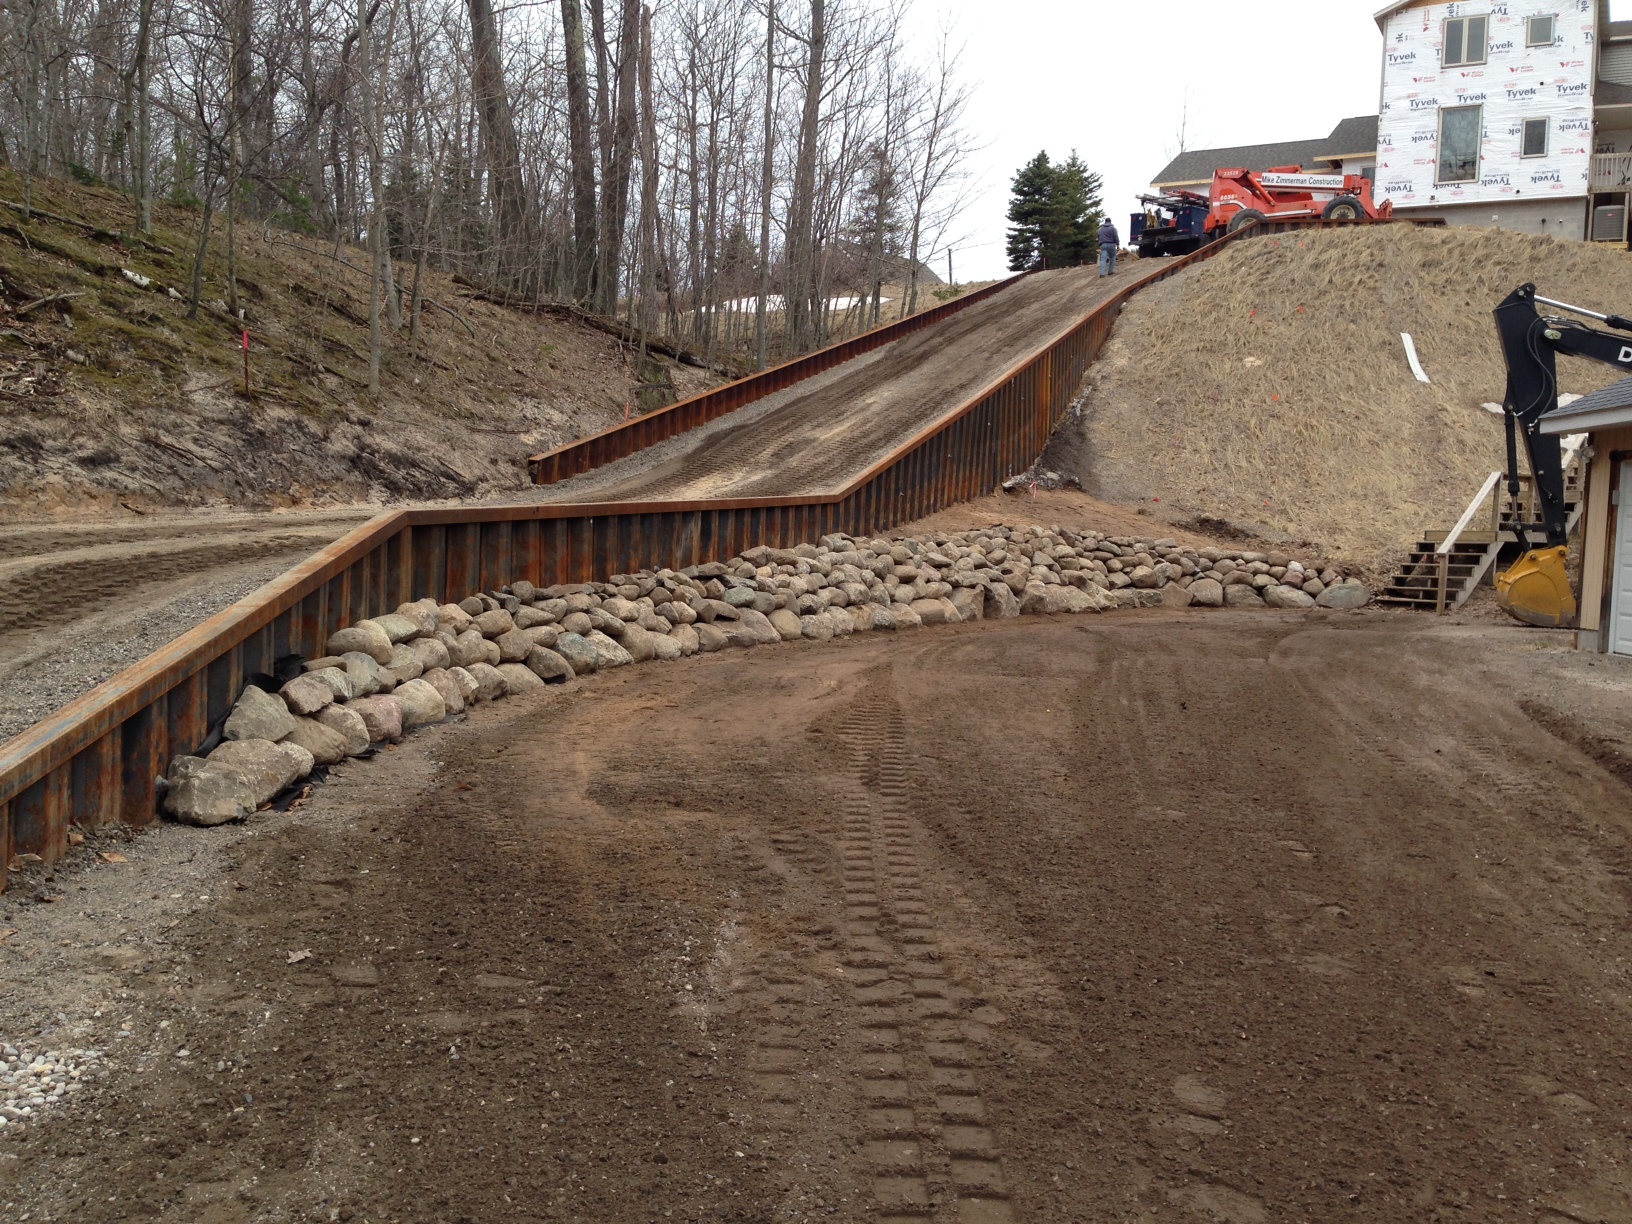  Steel Retaining Wall/New Driveway/Bank Stabilization/Rock Placement, photo 1 